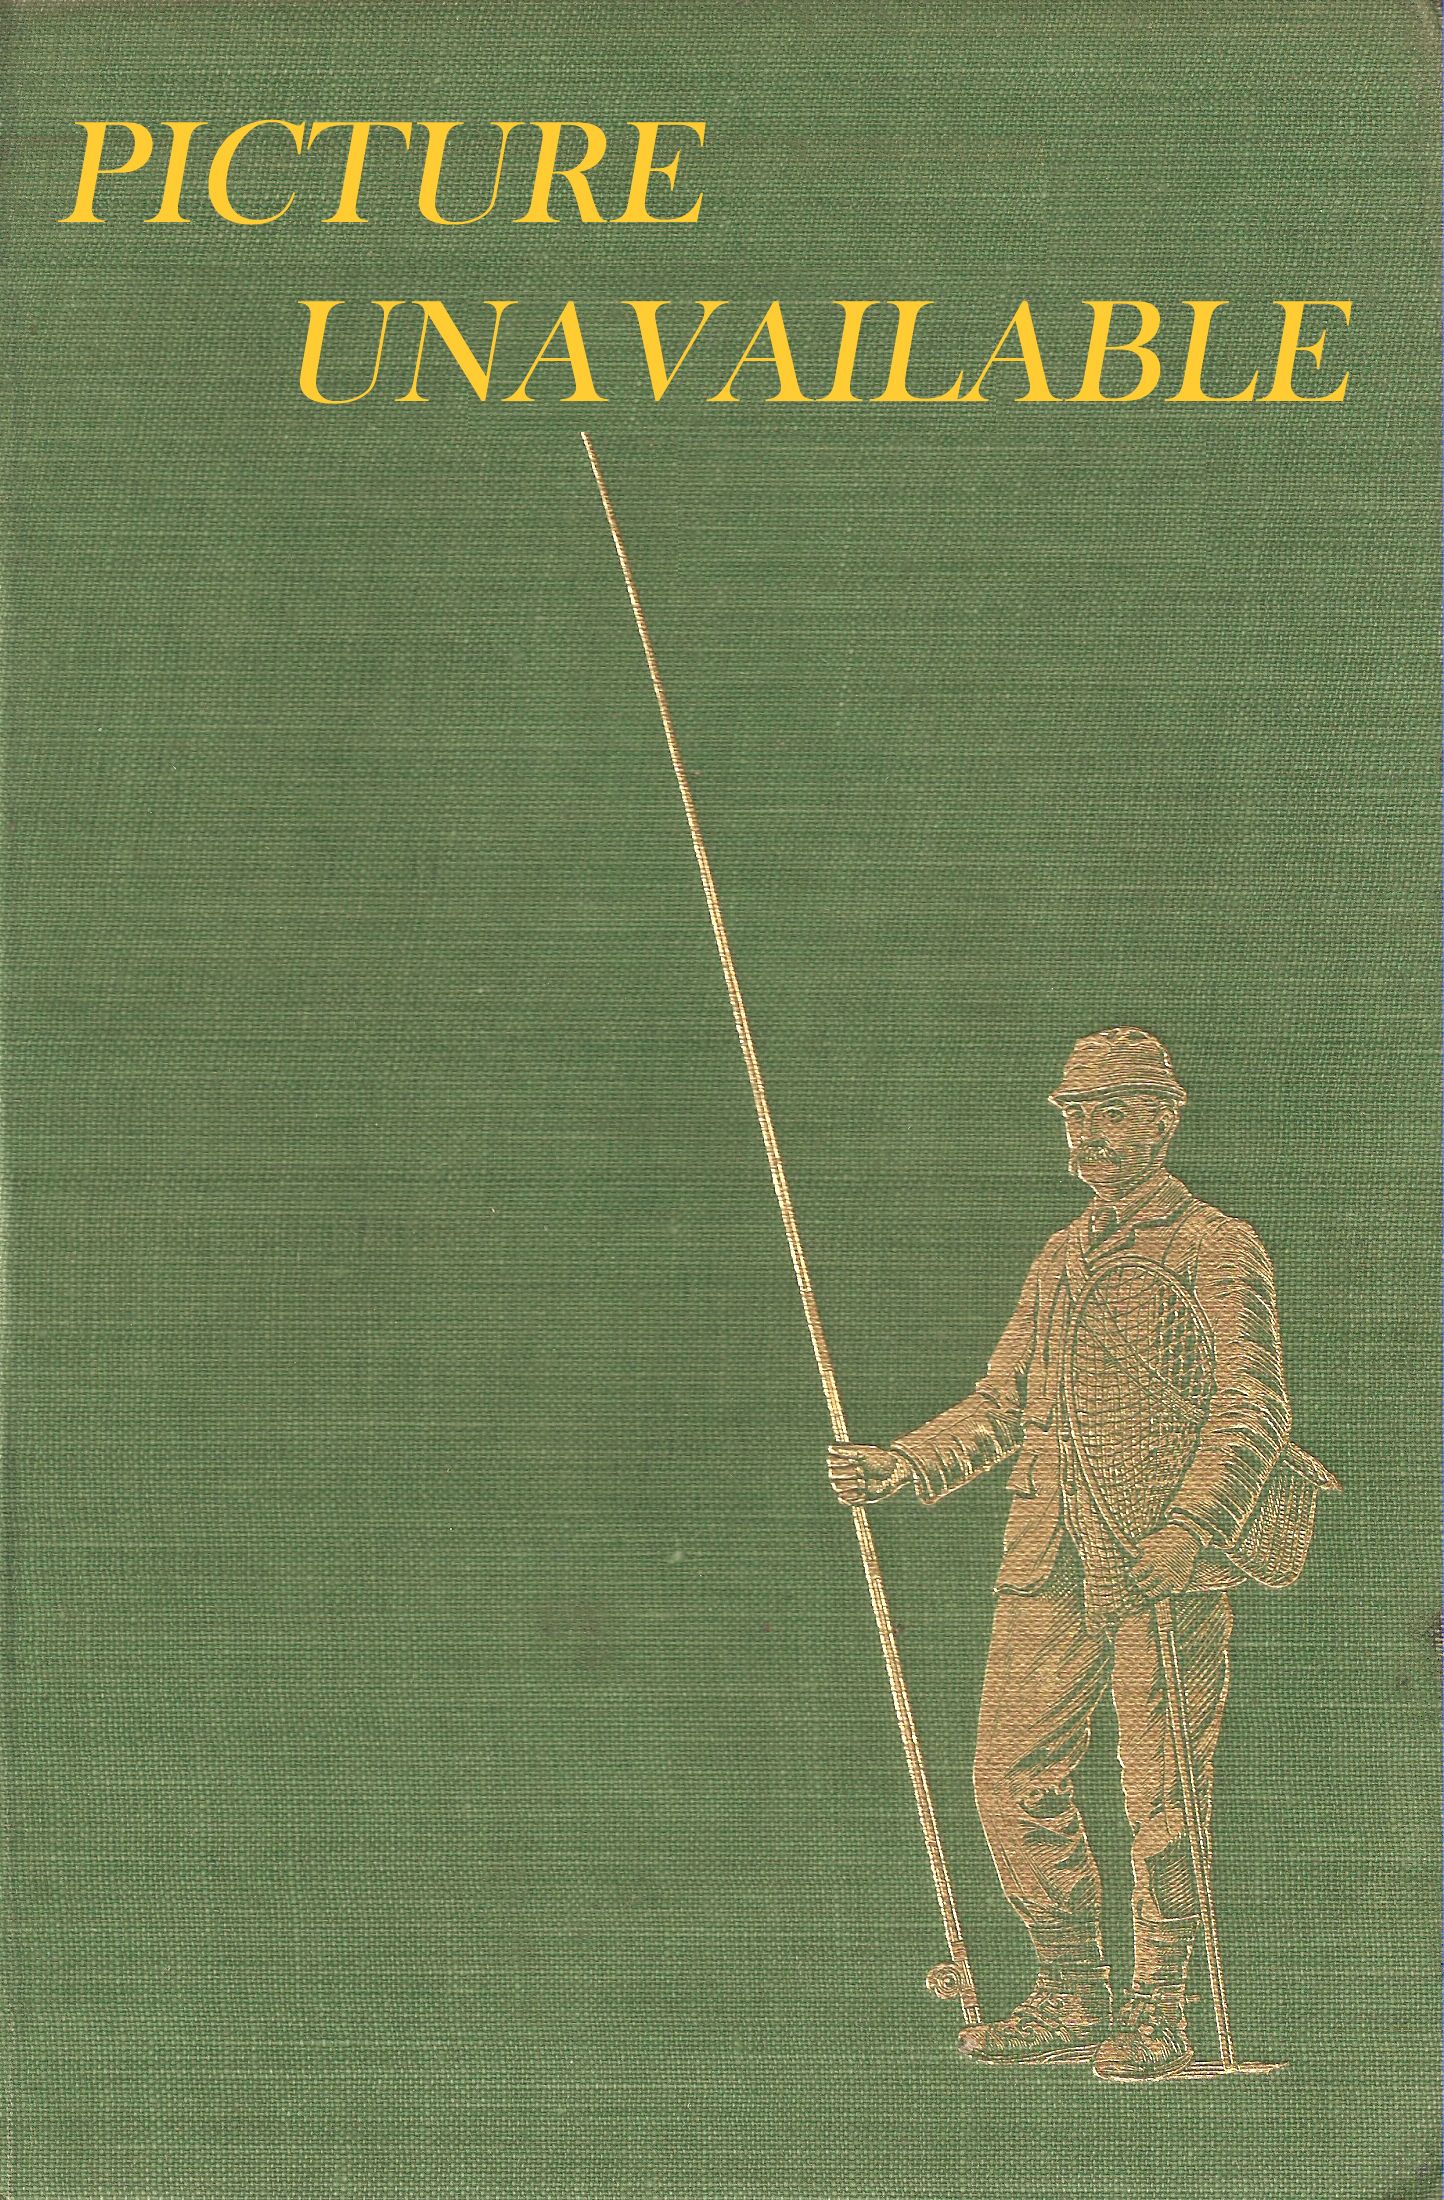 THE GUINNESS GUIDE TO GAME FISHING. By William B. Currie.